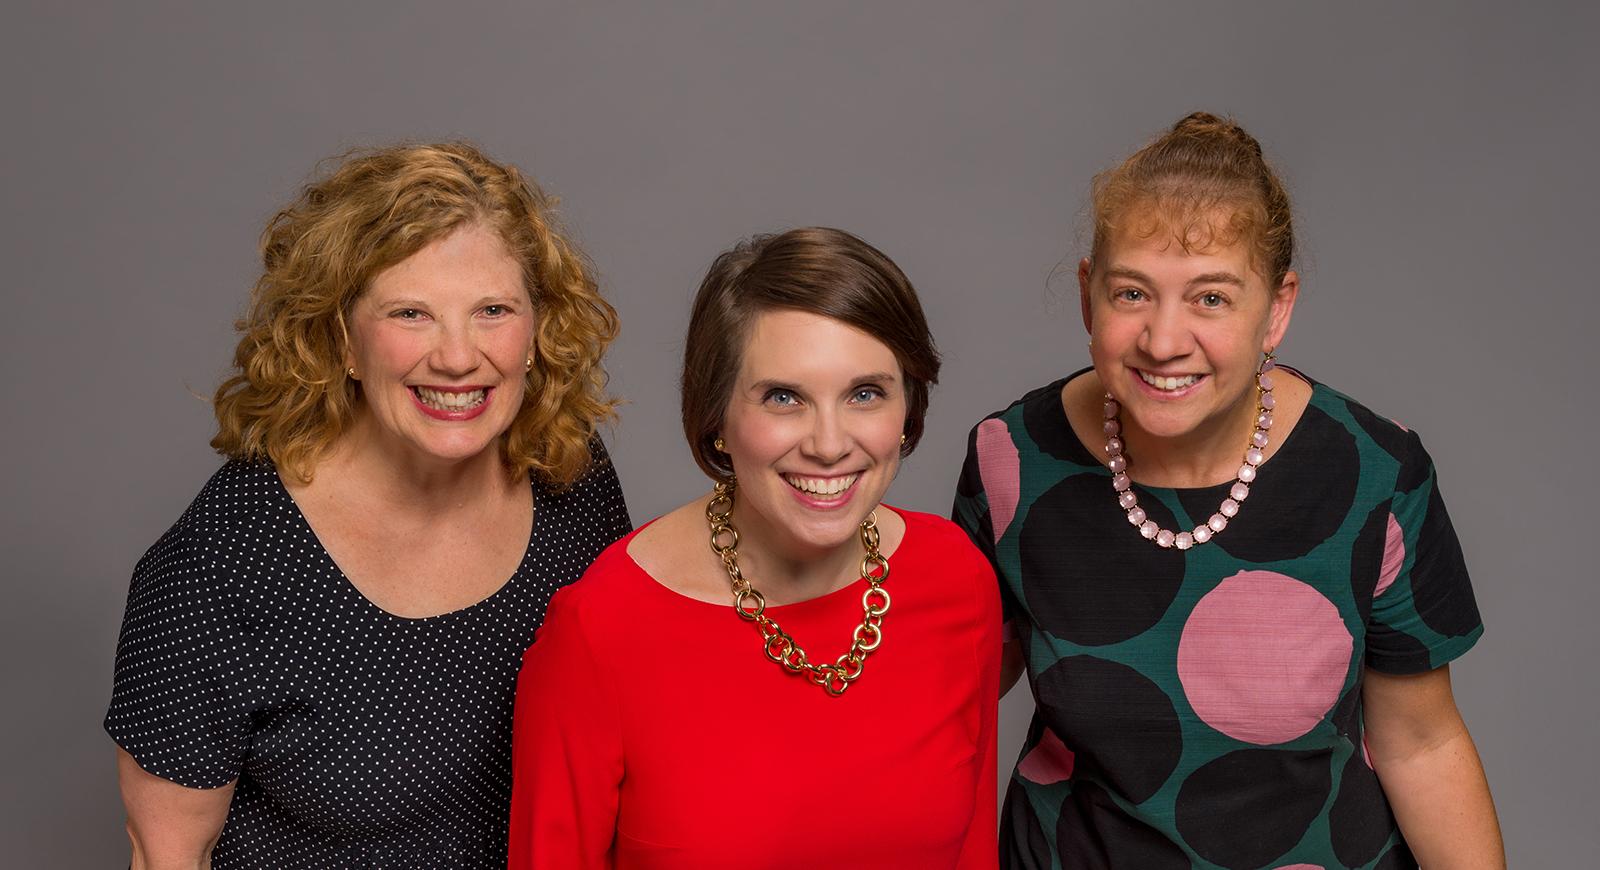 Photo of three women in professional clothing, smiling for the camera